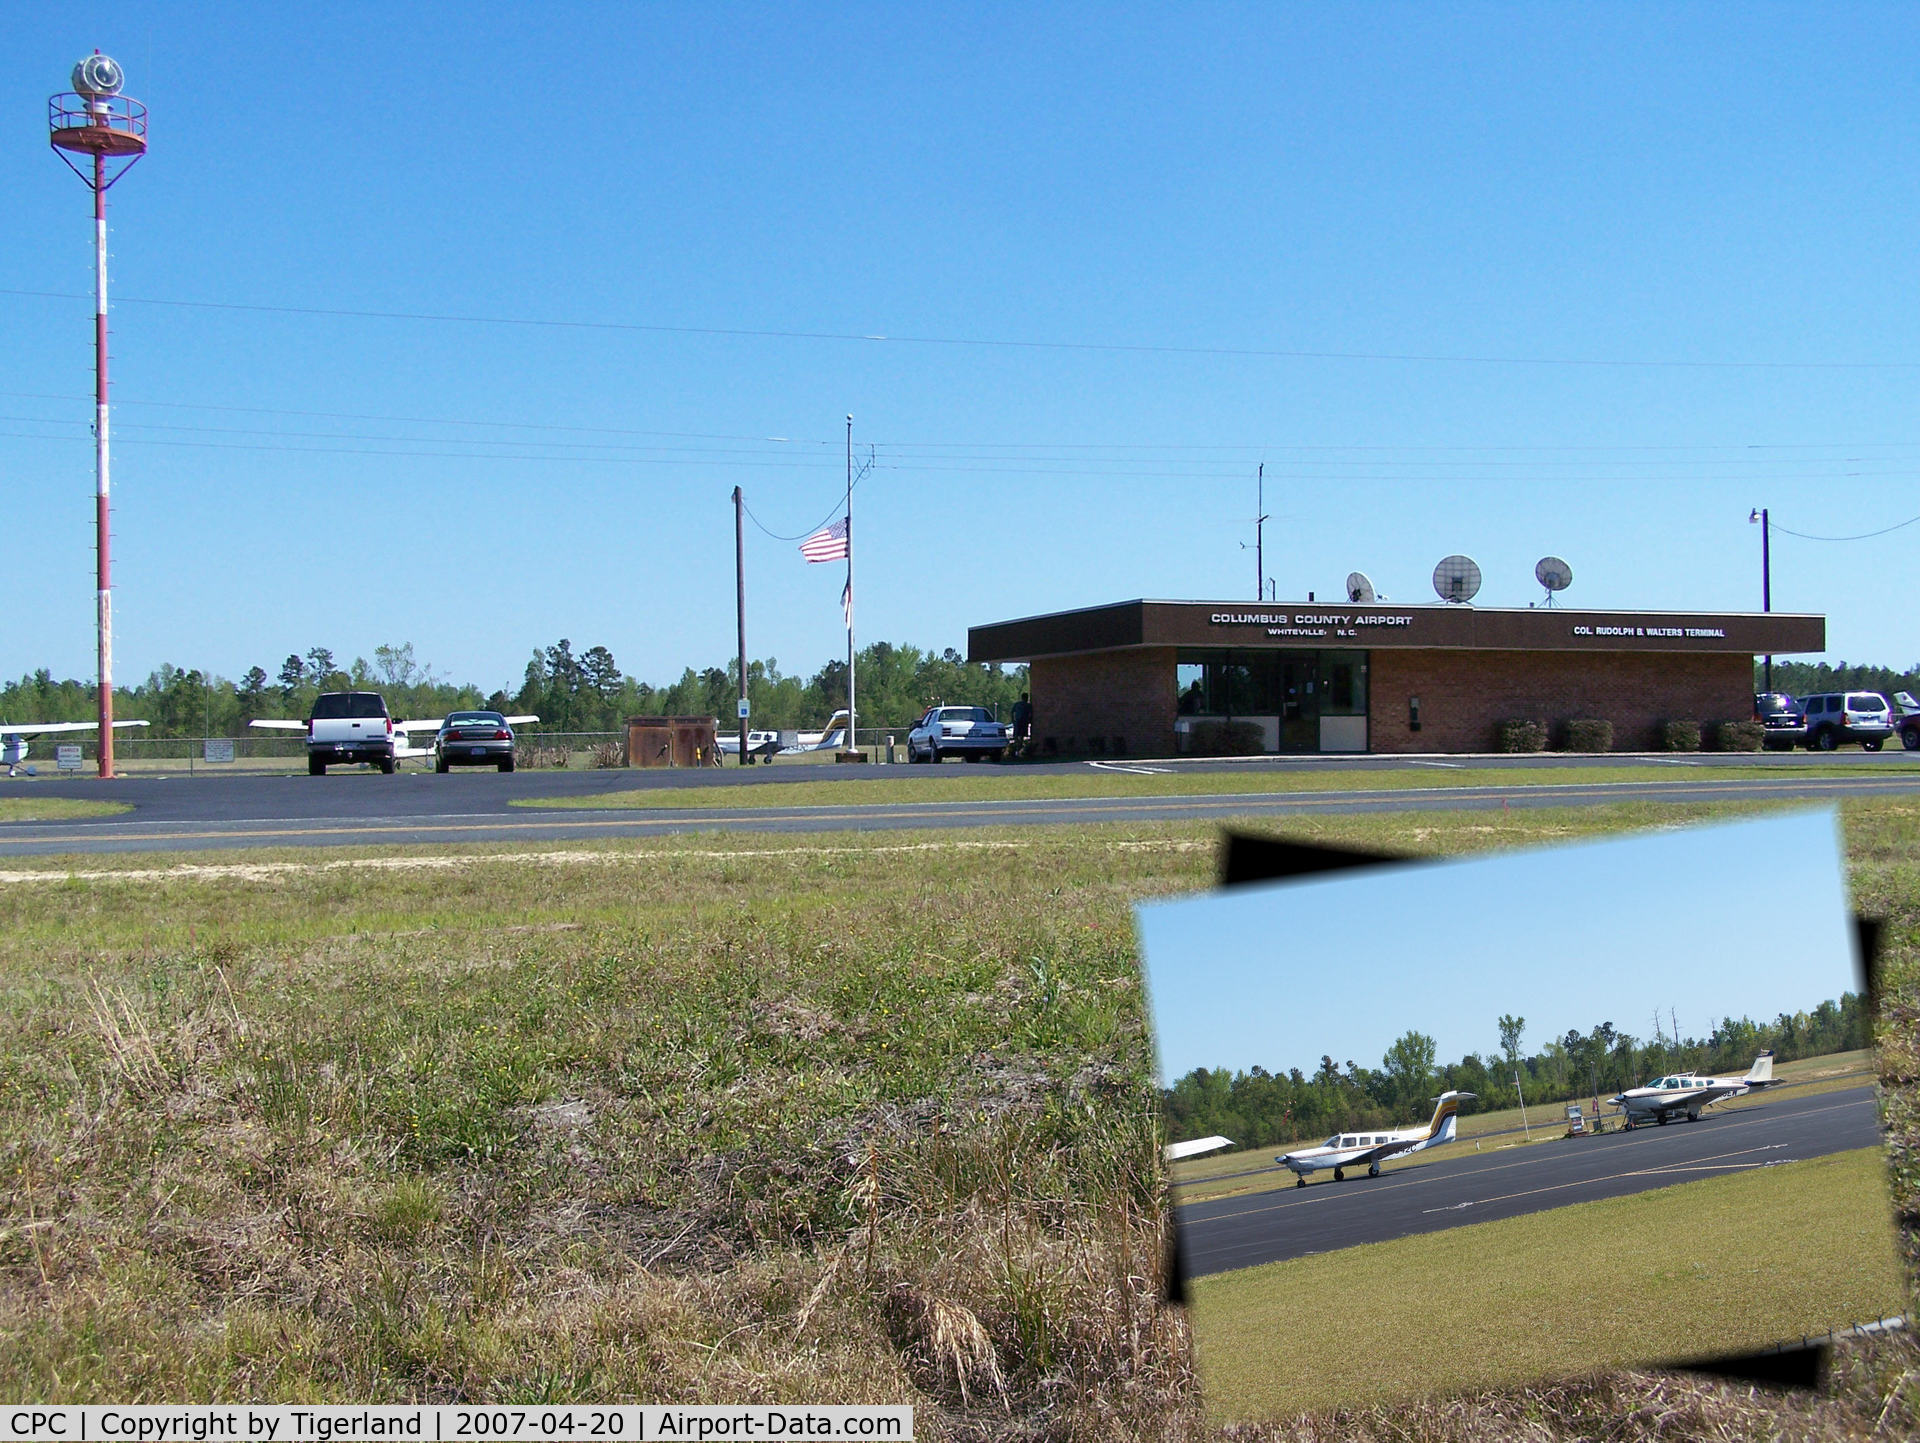 Columbus County Municipal Airport (CPC) - Clean facility-Friendly staff